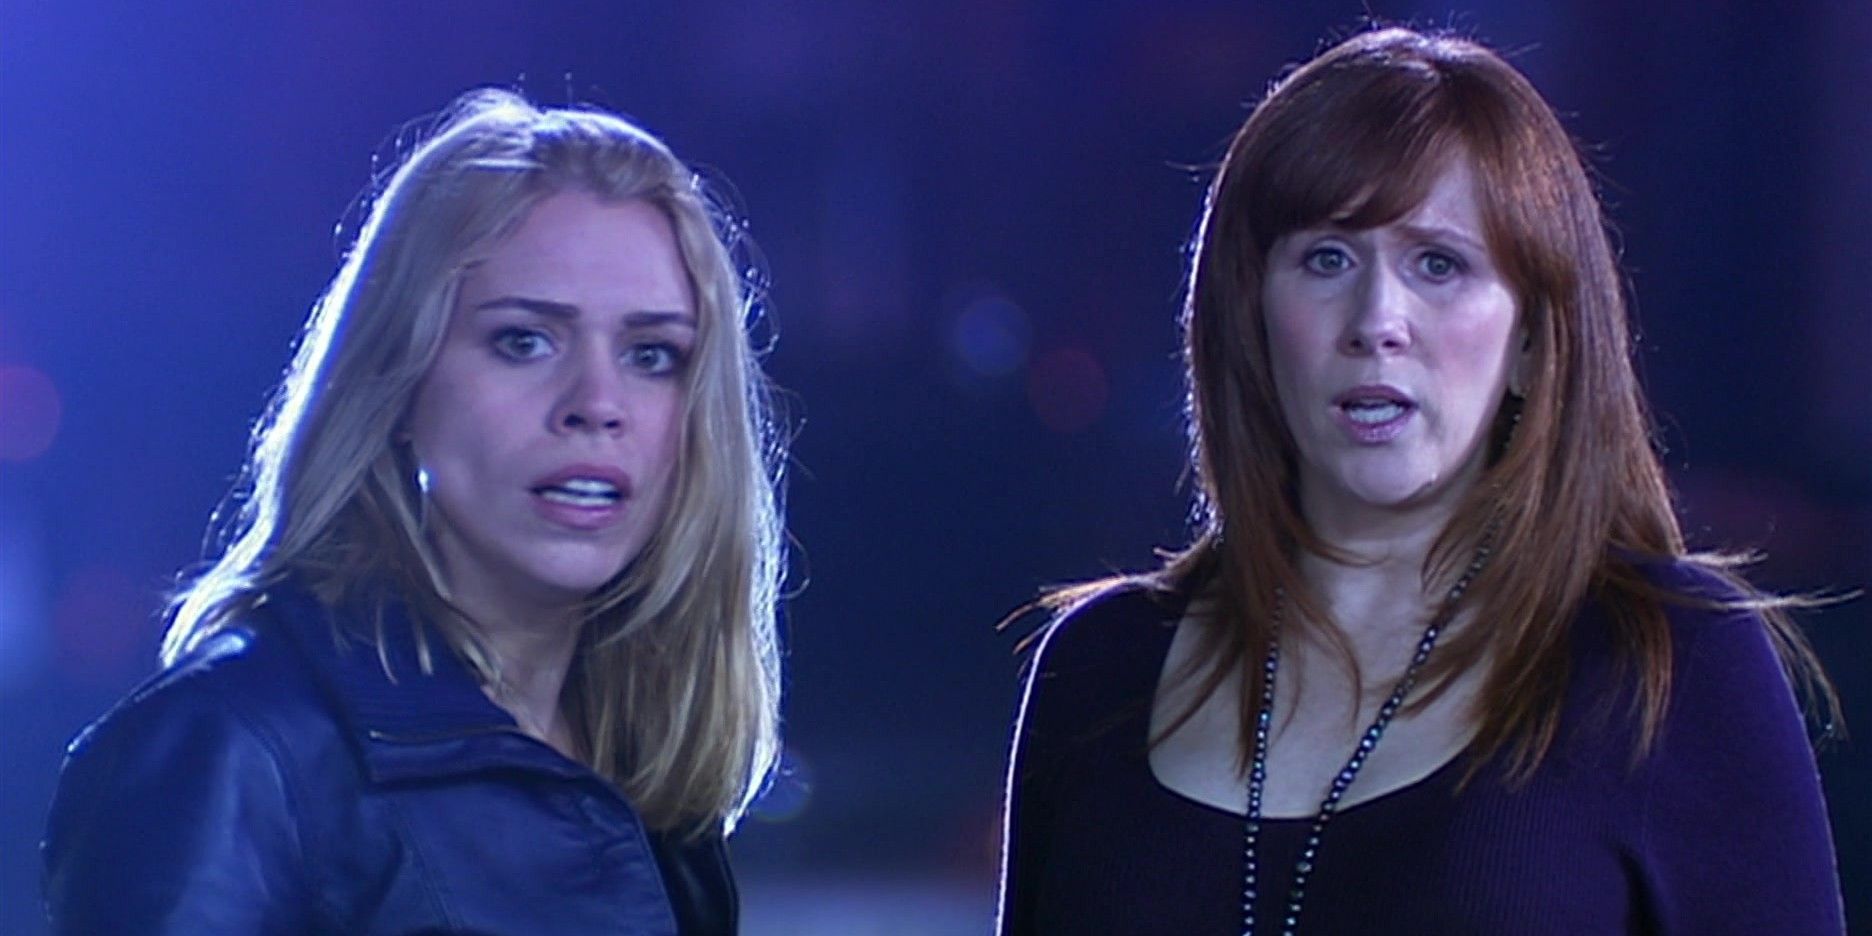 Rose Tyler and Donna Noble looking worried at night in Doctor Who